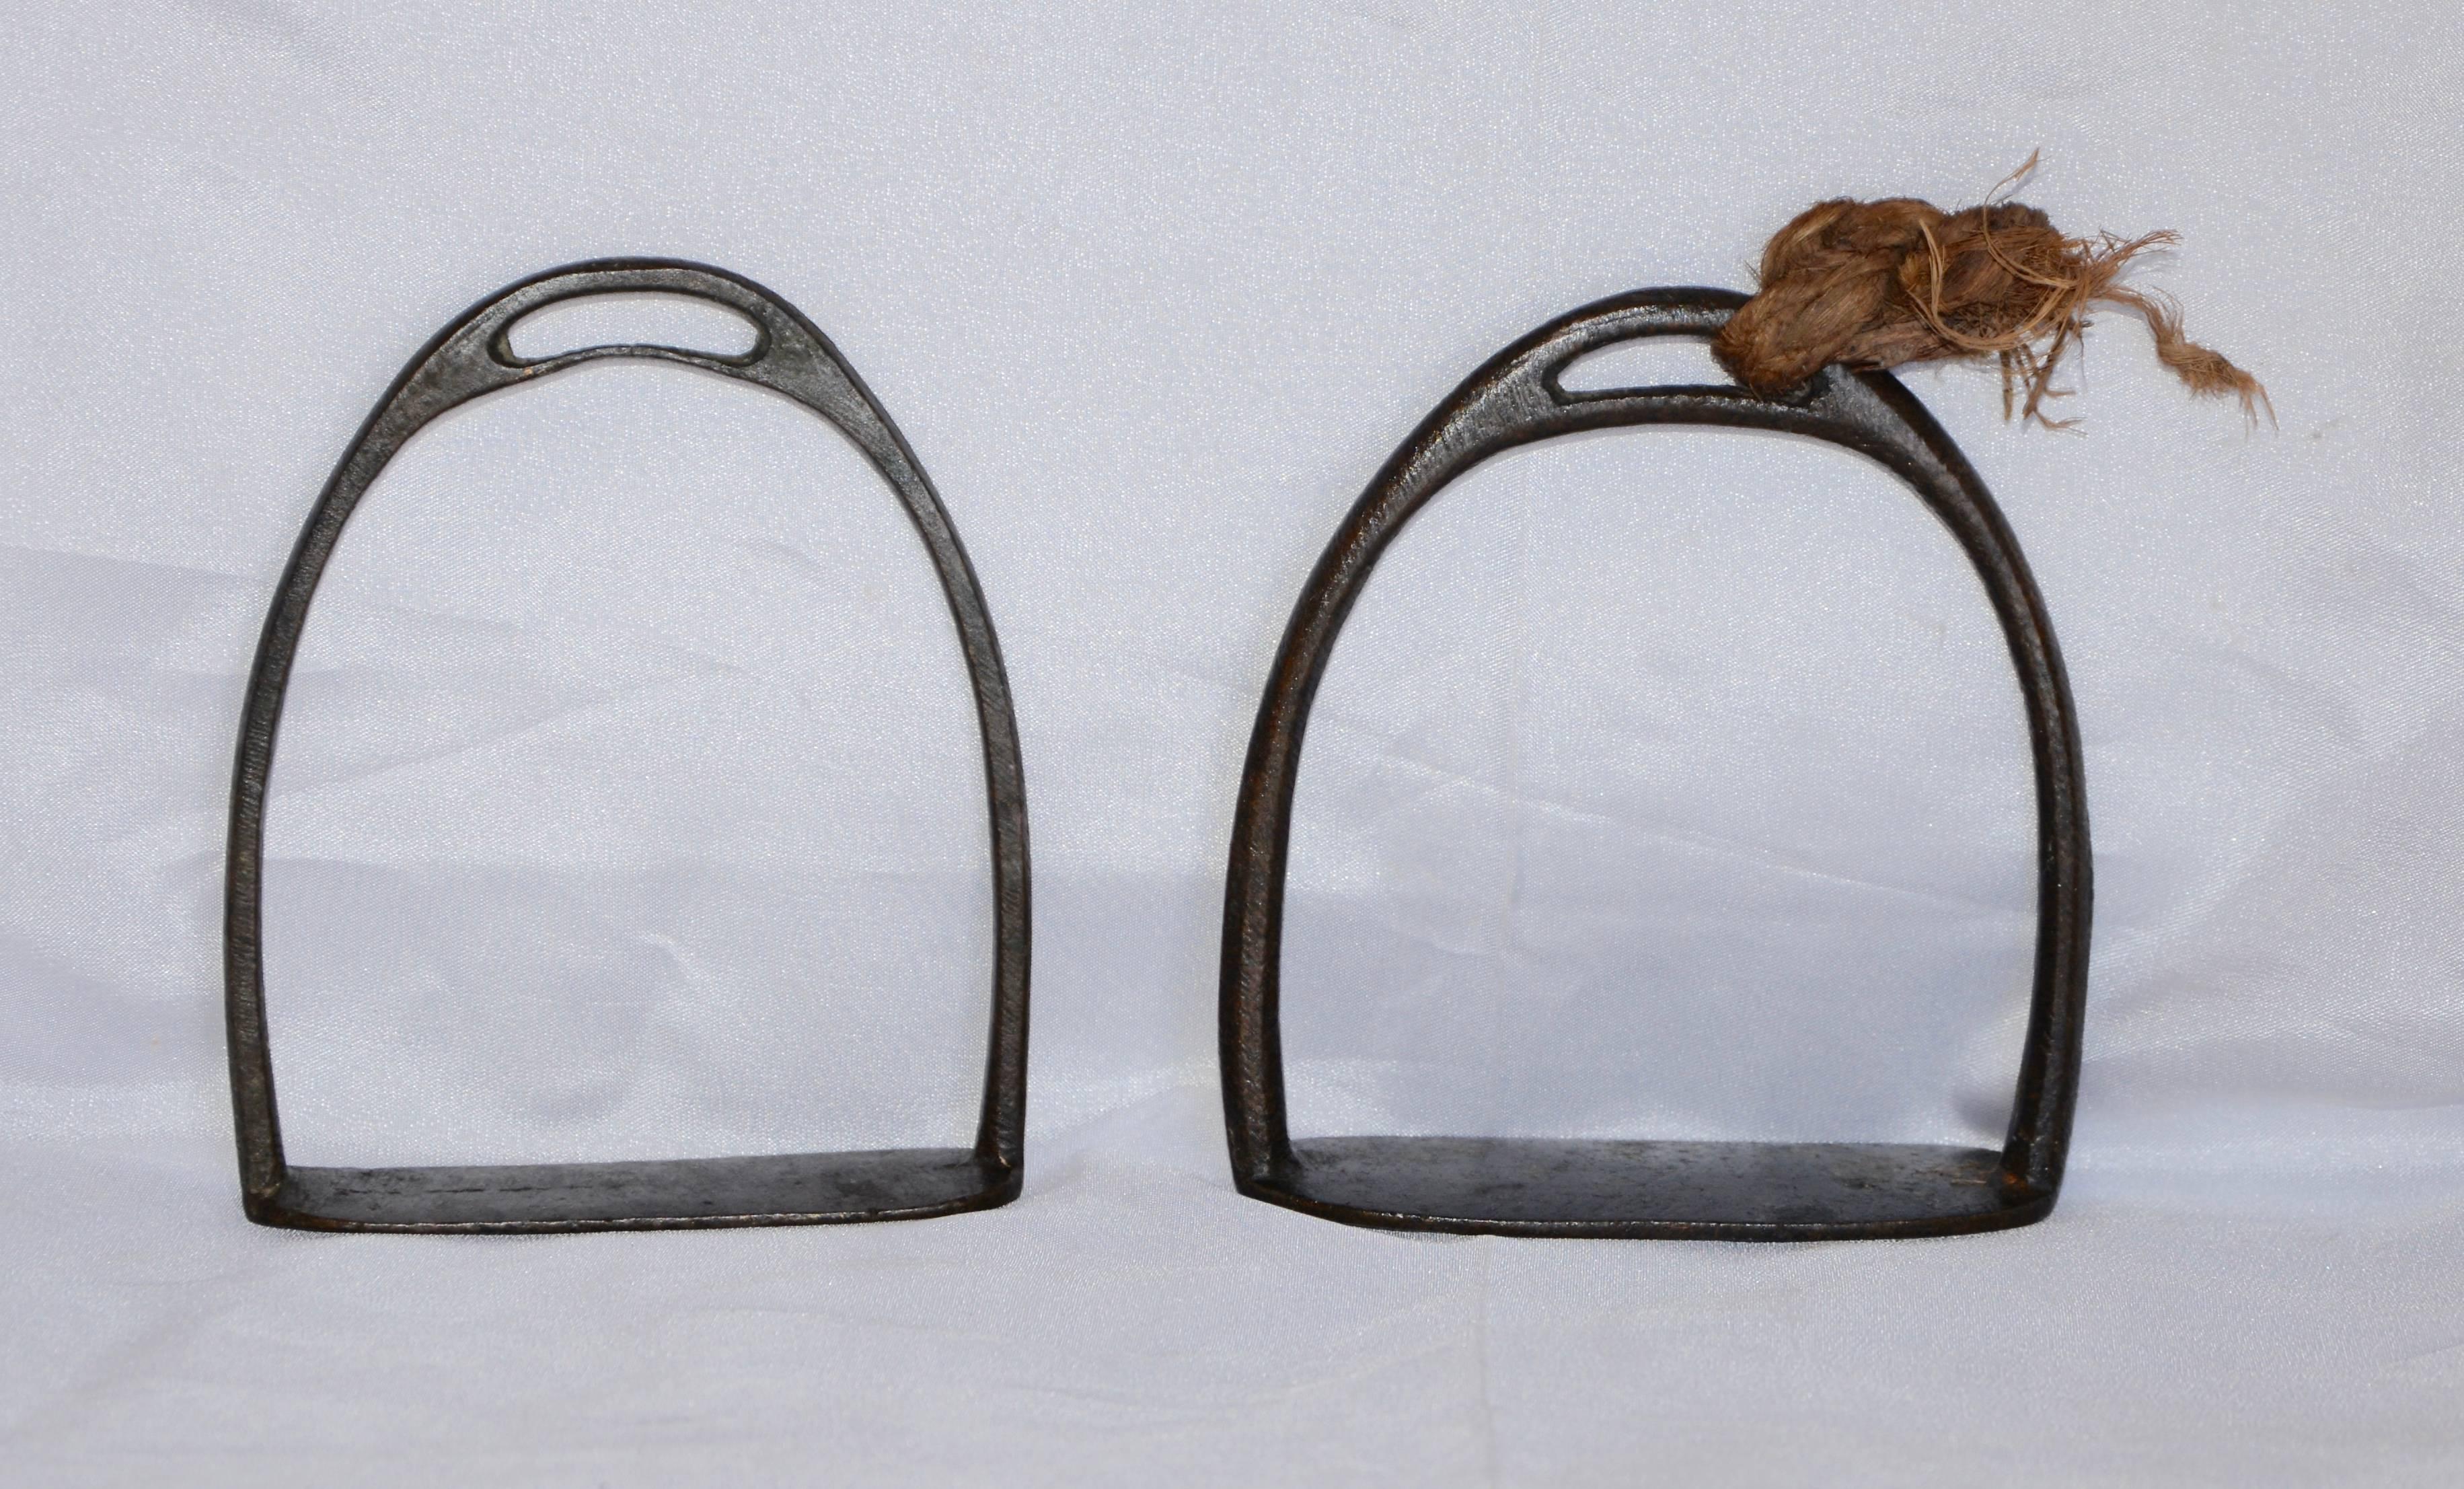 If you love equestriana, you need to add these two handwrought cast iron horse stirrups to your collection! They can serve as bookends, napkin holders, or whatever your imagination conjures up! One still has a piece of an old rope attached. There is